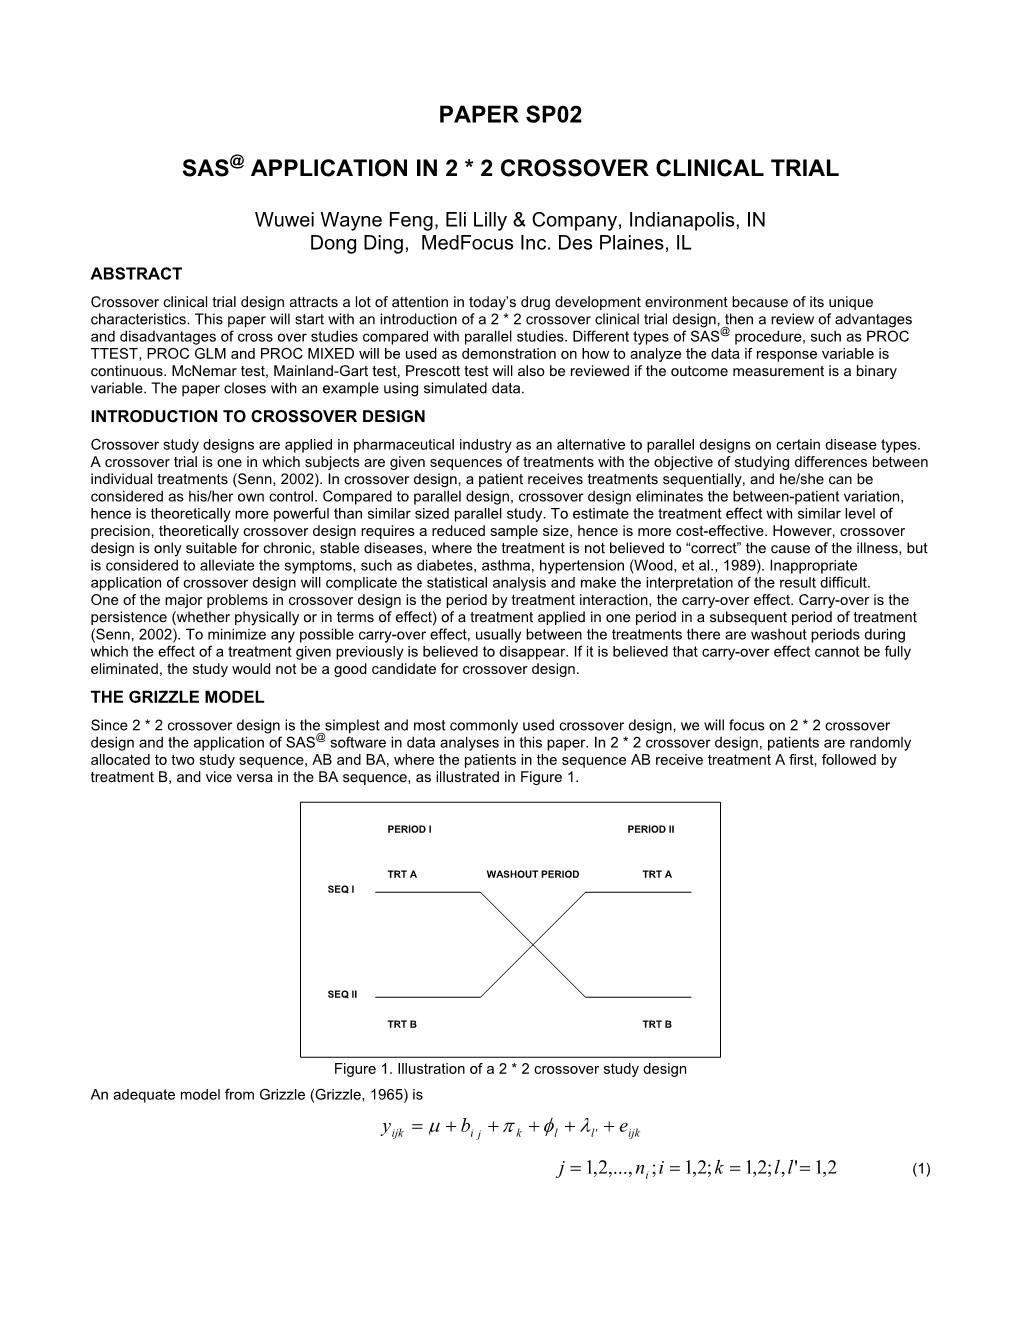 Sas@ Application in 2 * 2 Crossover Clinical Trial